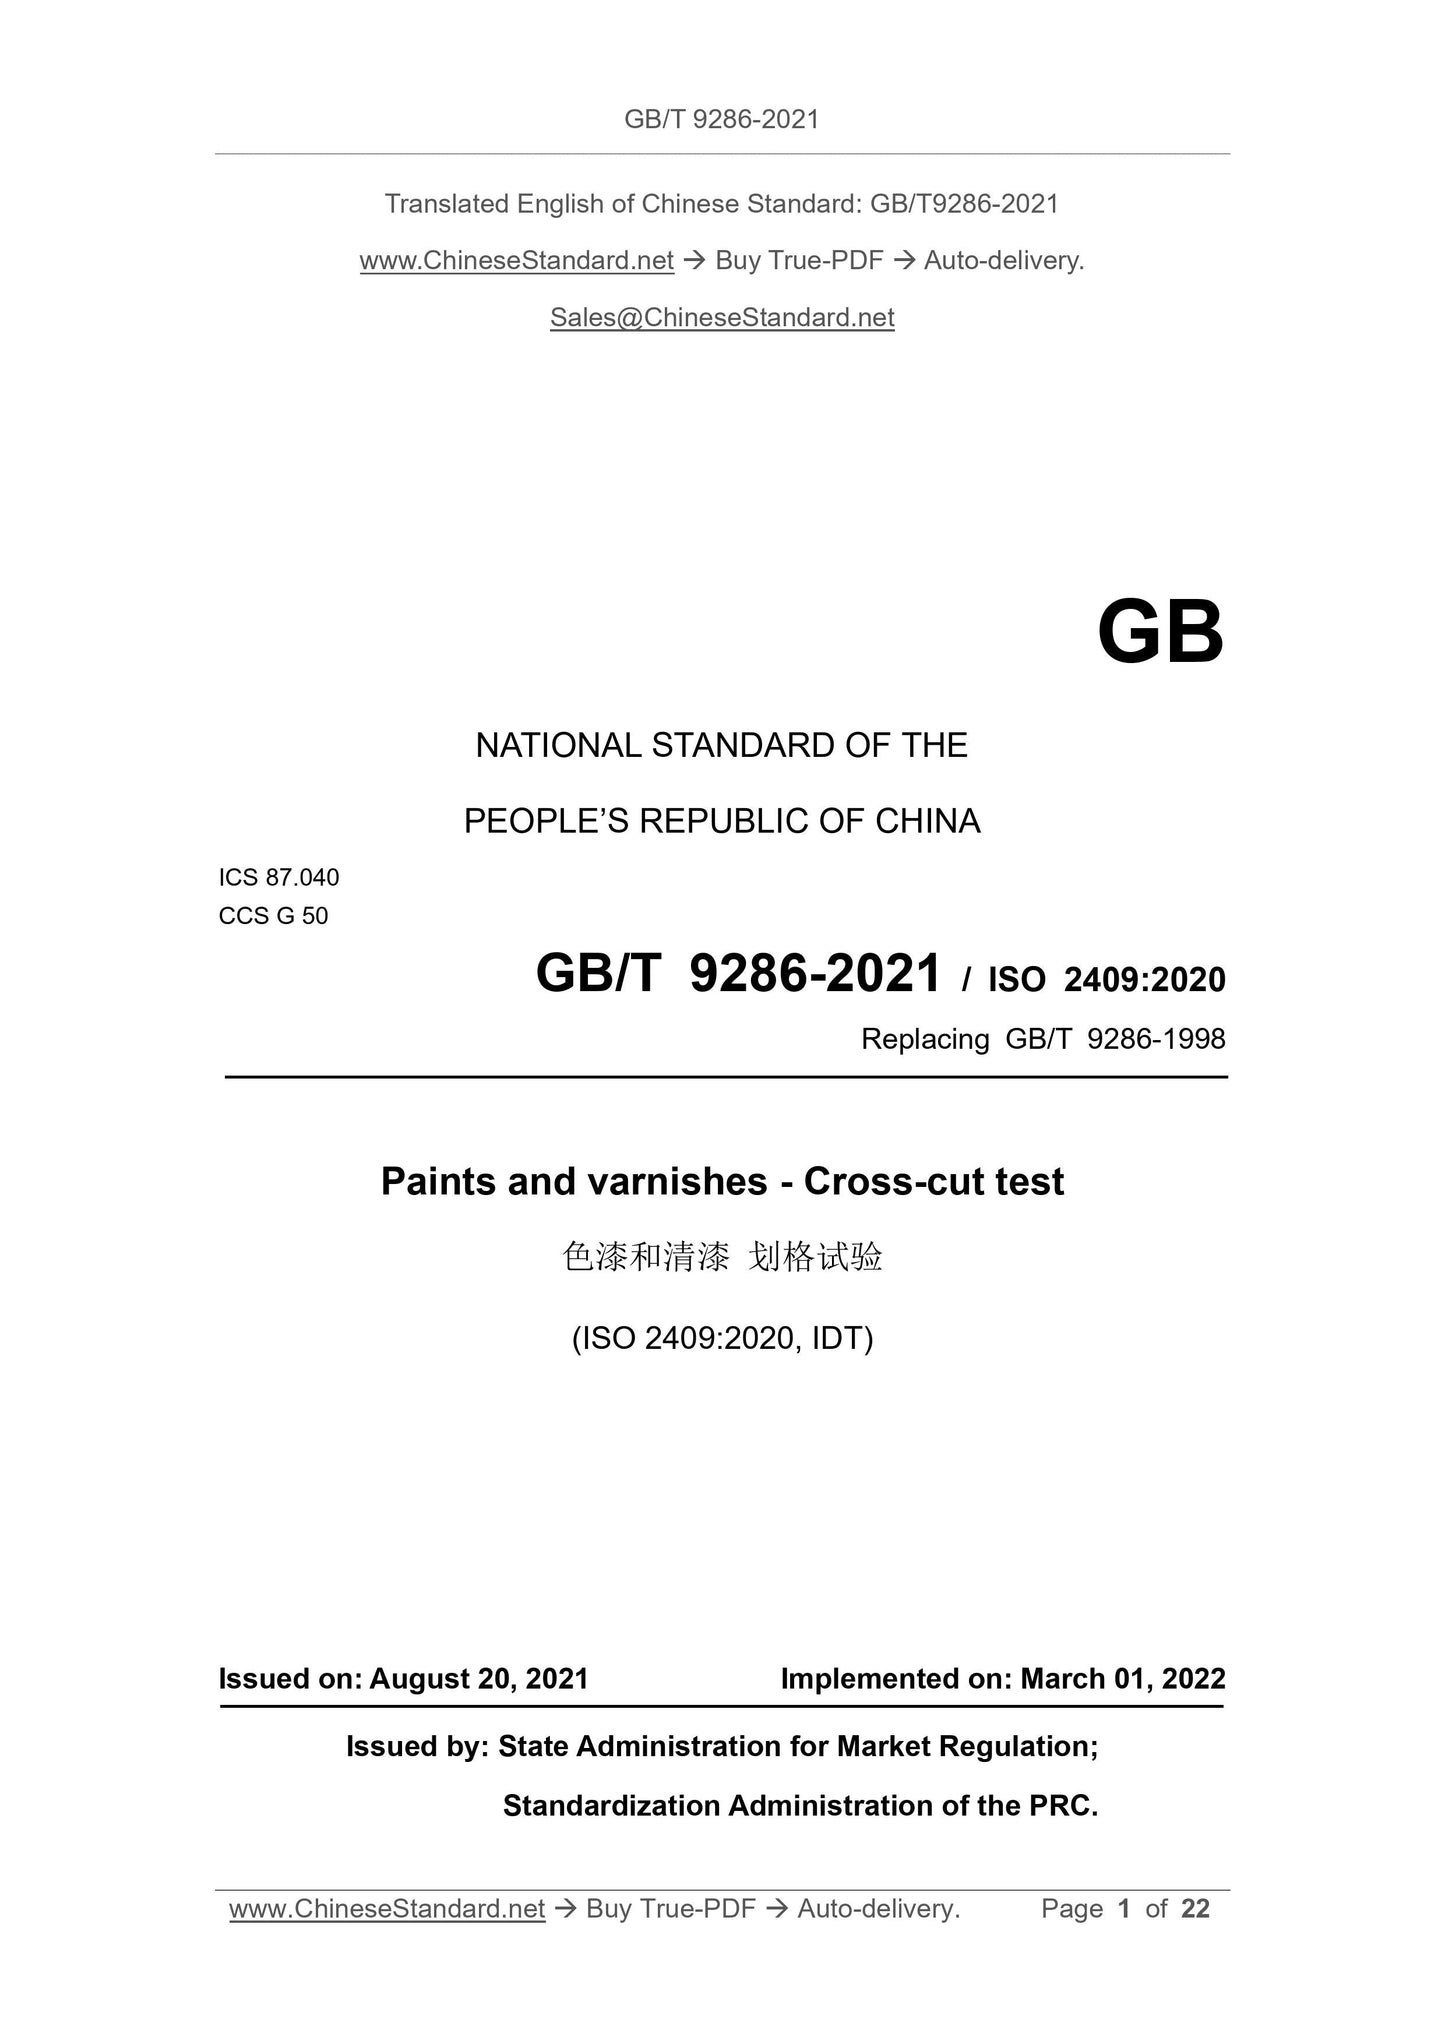 GB/T 9286-2021 Page 1